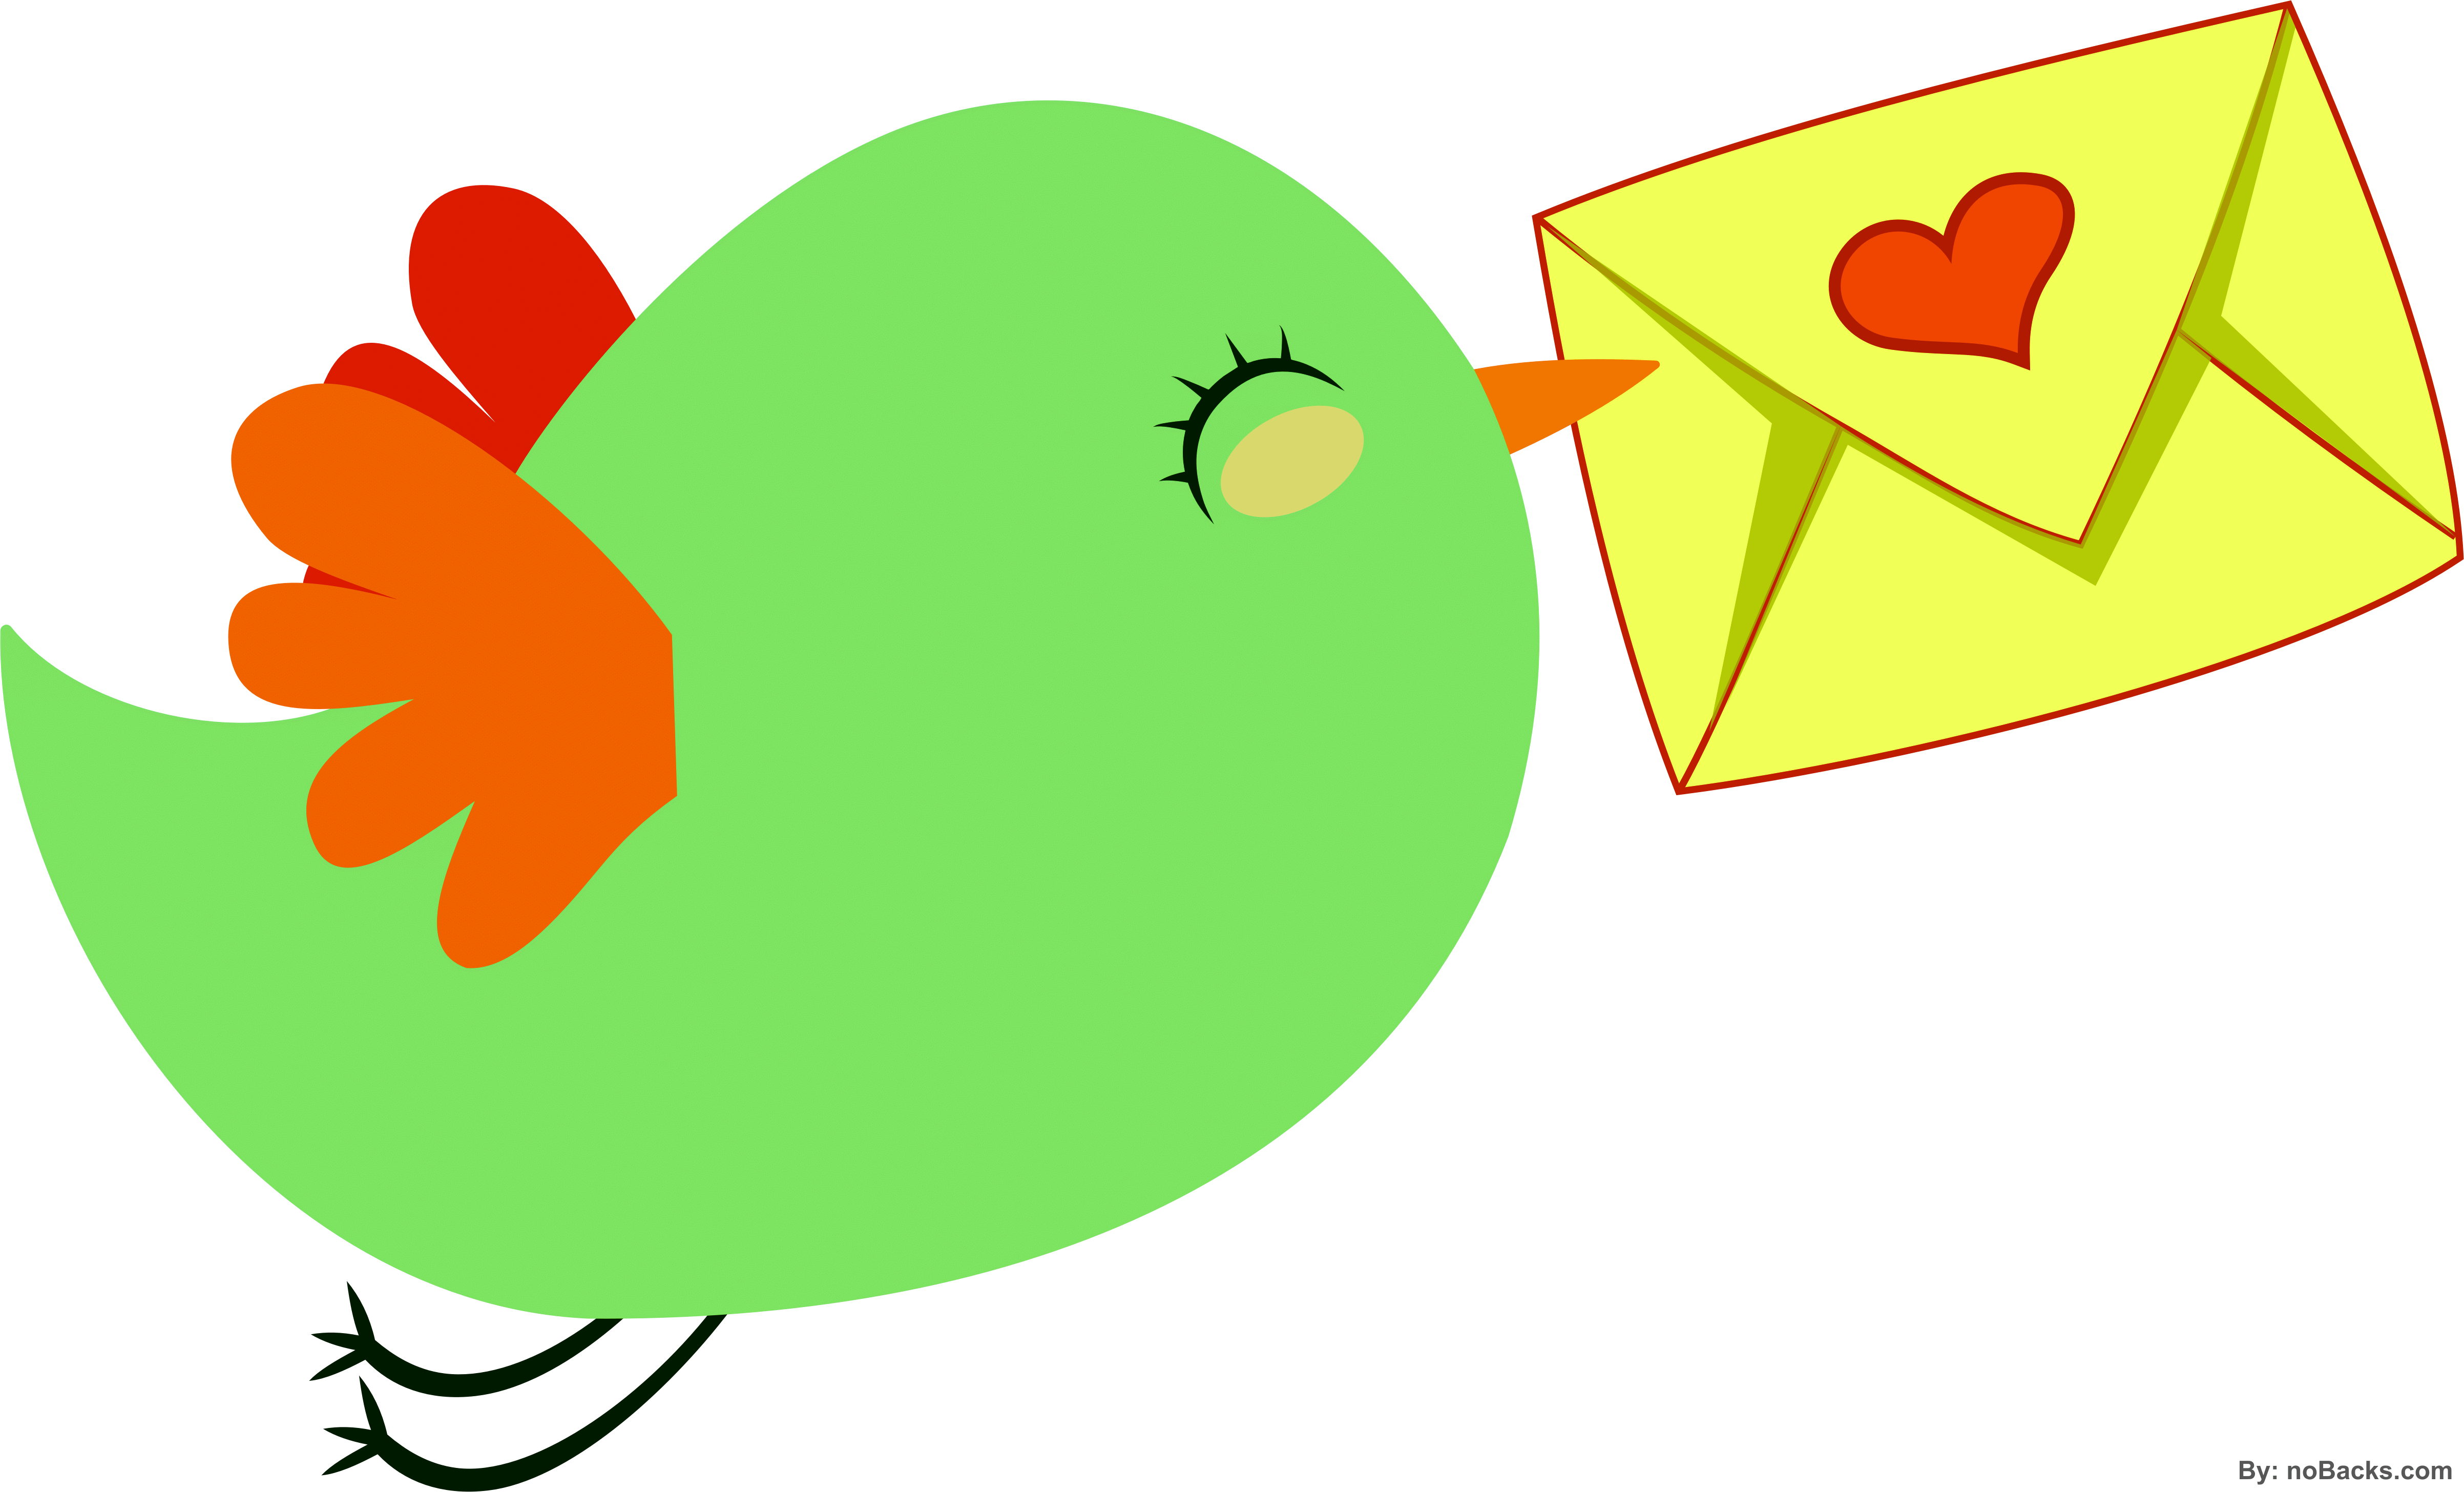 Small Bird Flying With Love Letter - Flying Bird With Letter (4810x2912)